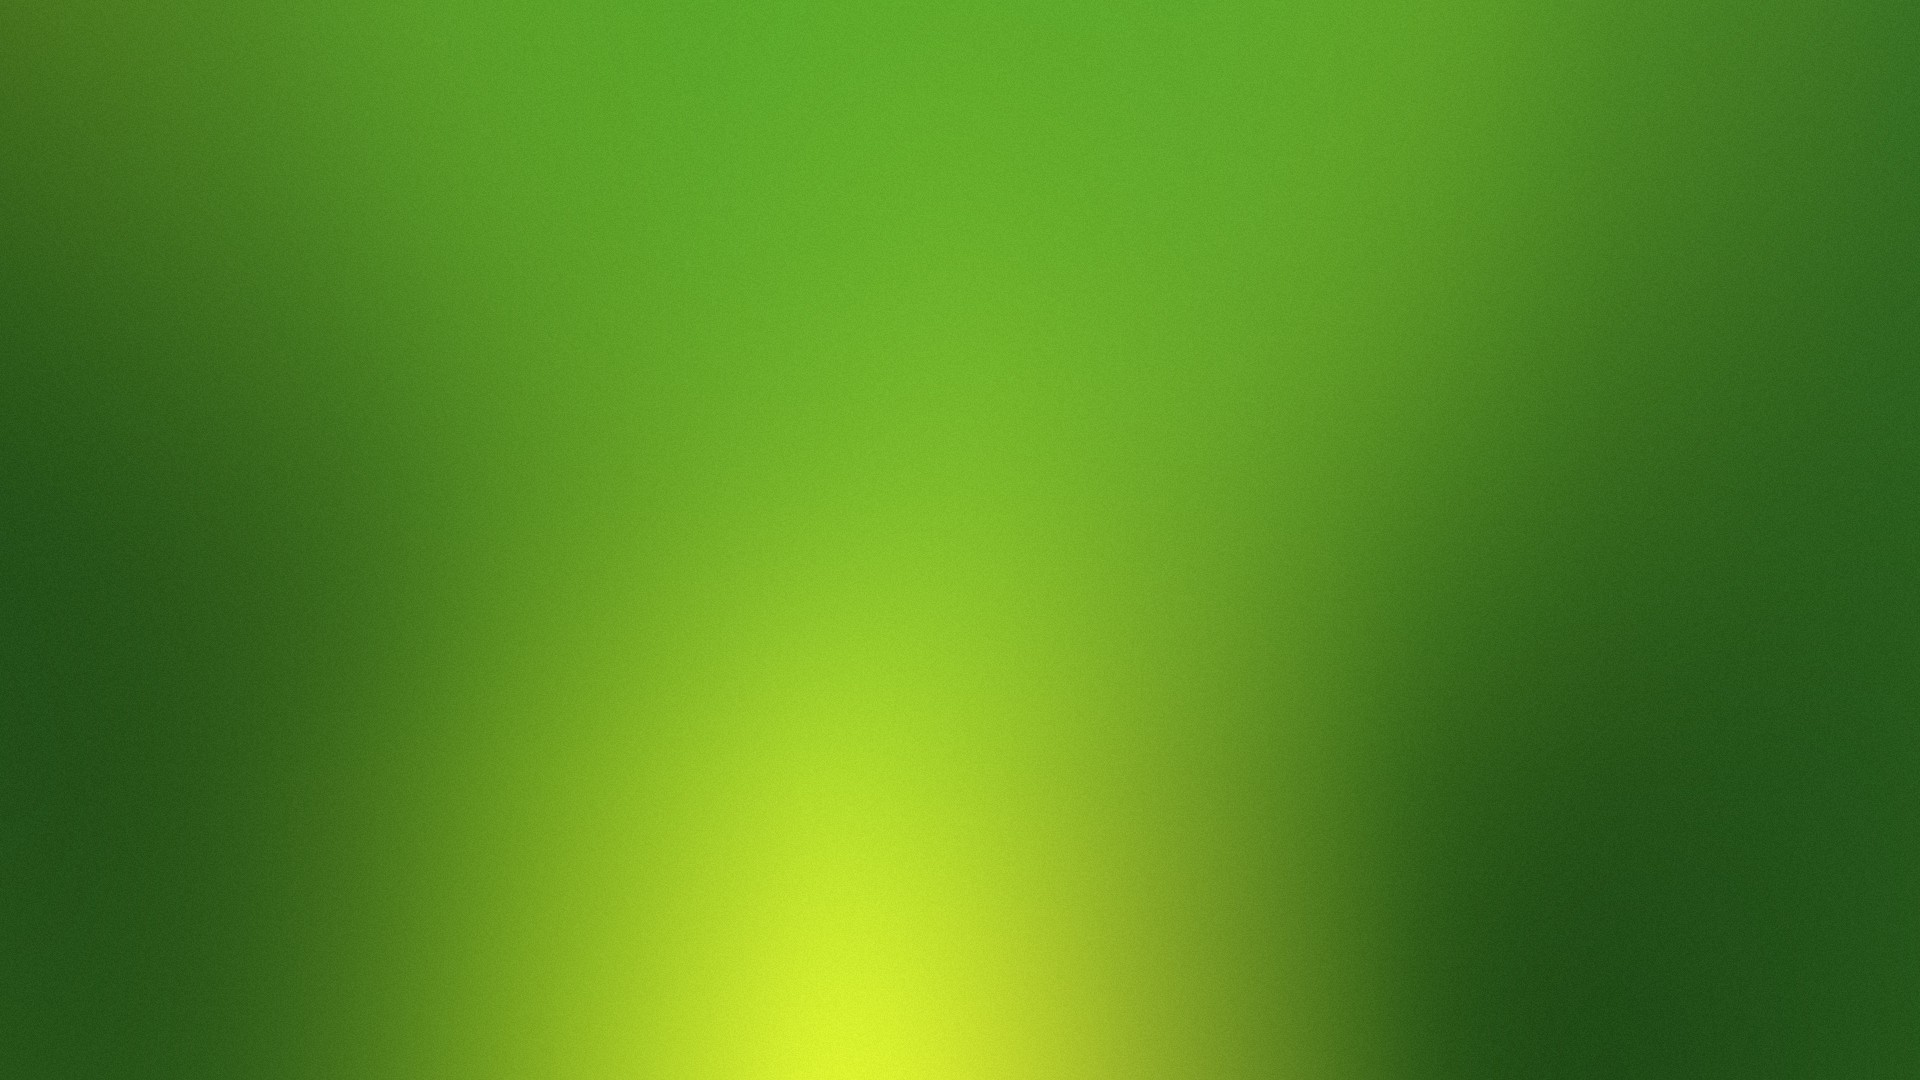 Wallpaper HD Green Neon with image resolution 1920x1080 pixel. You can make this wallpaper for your Desktop Computer Backgrounds, Mac Wallpapers, Android Lock screen or iPhone Screensavers